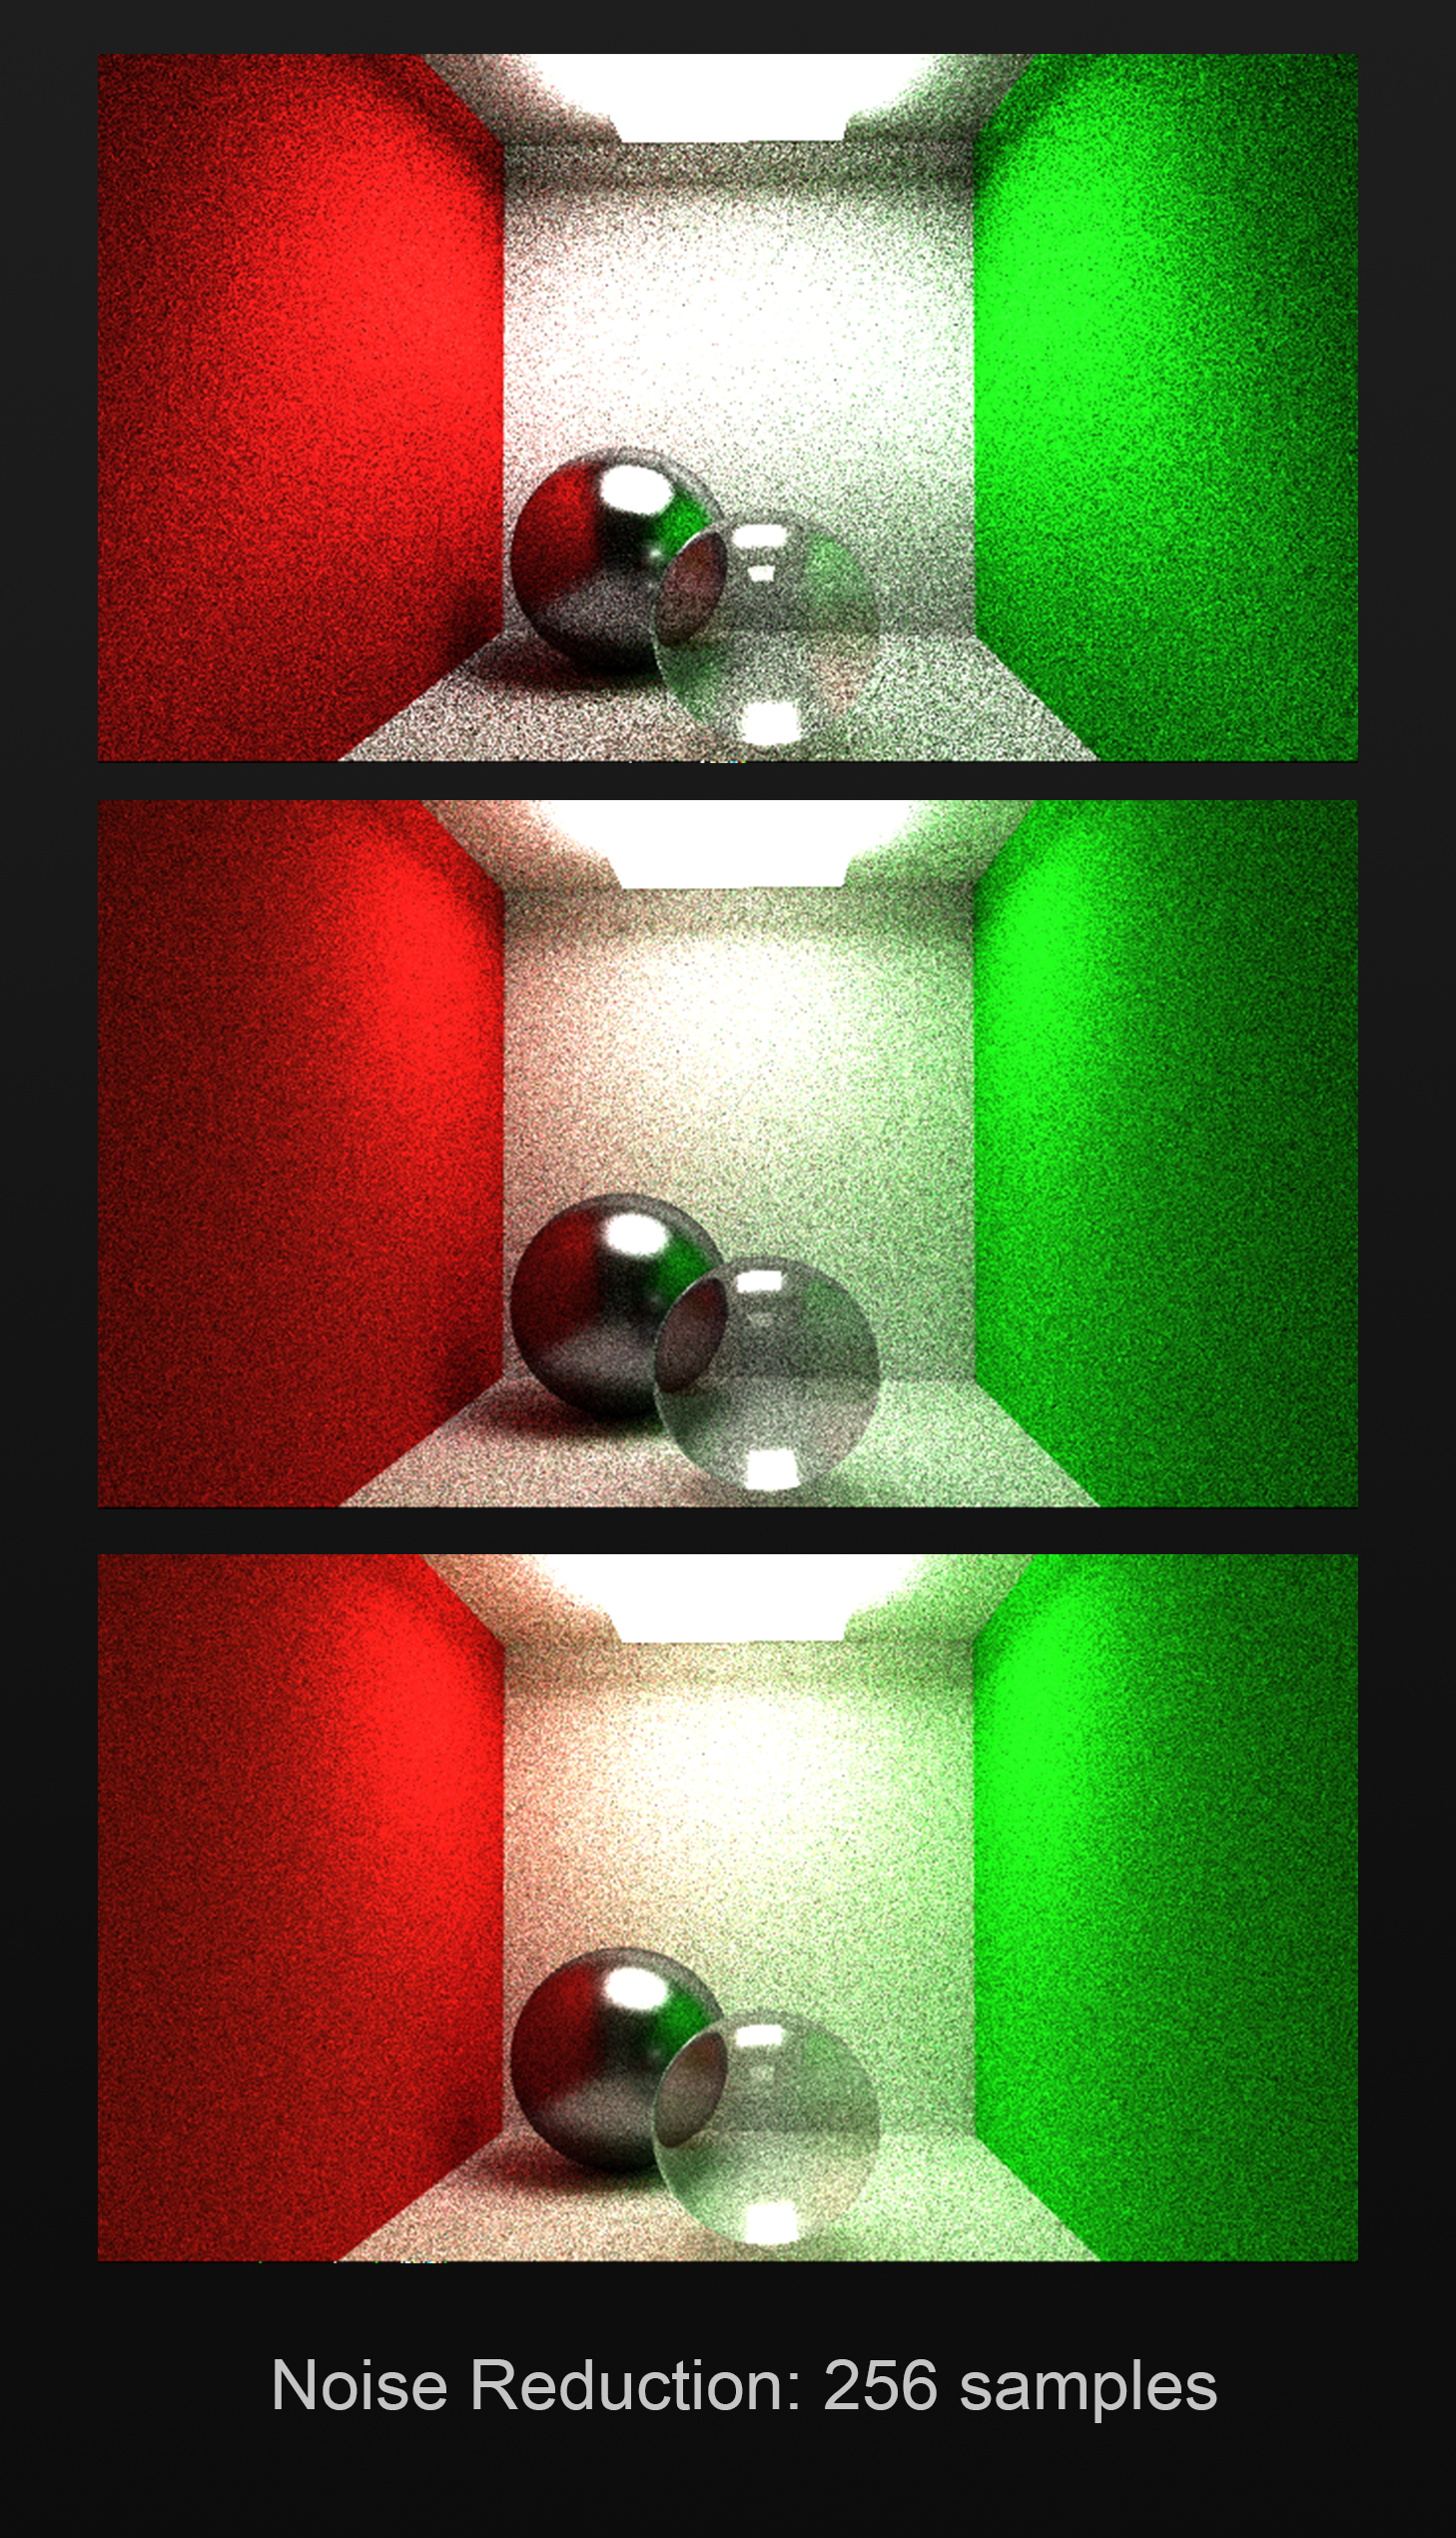 Noise reduction in LightWhat pathtracer